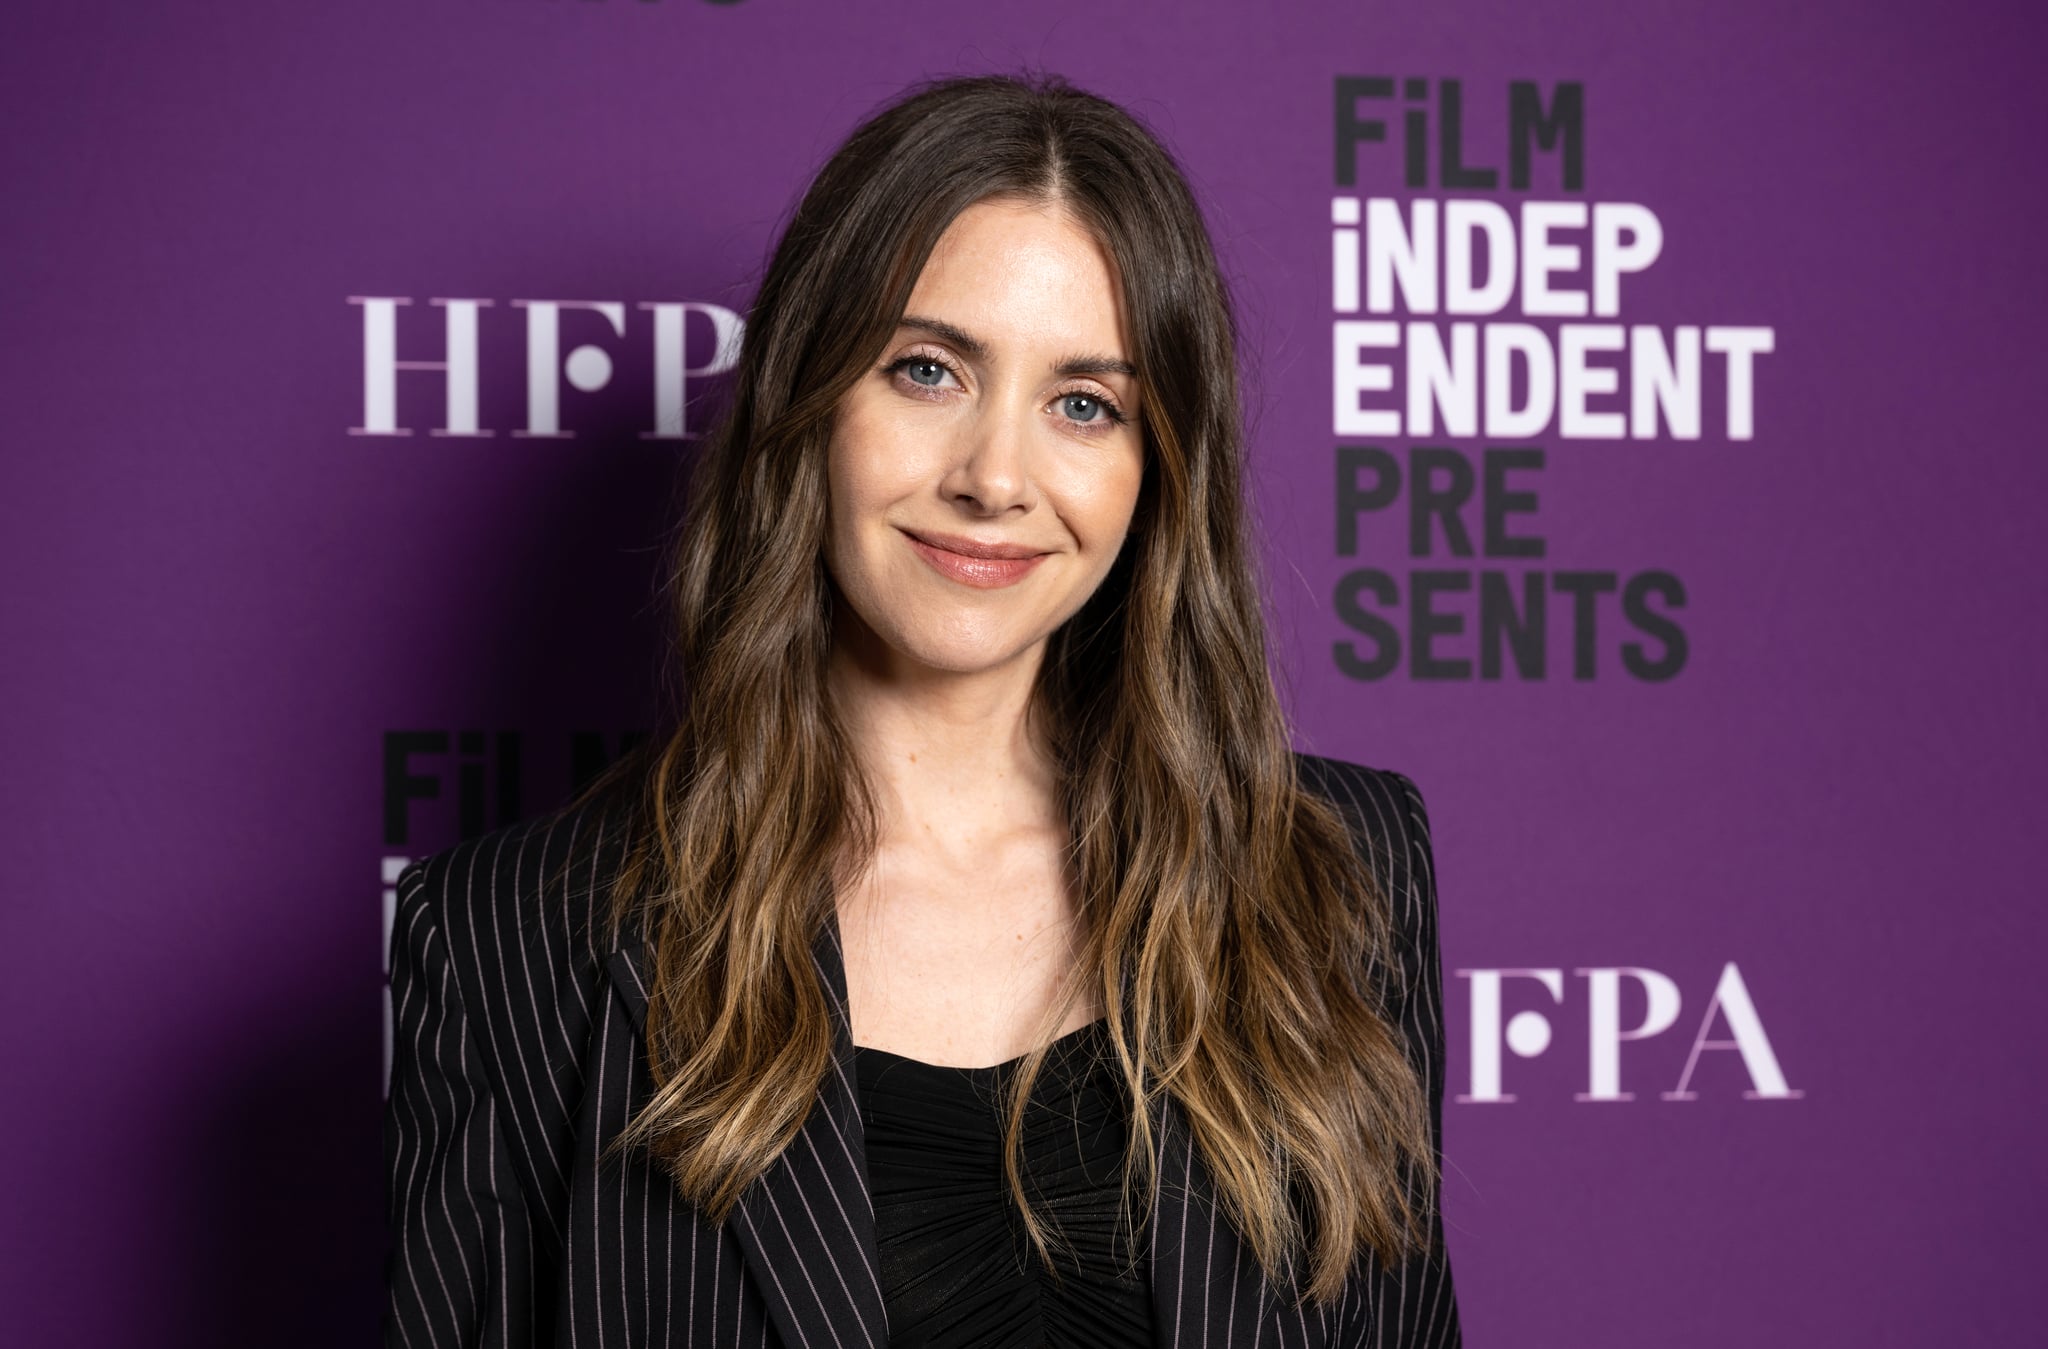 LOS ANGELES, CALIFORNIA - FEBRUARY 03: Actress / writer Alison Brie attends the Film Independent 